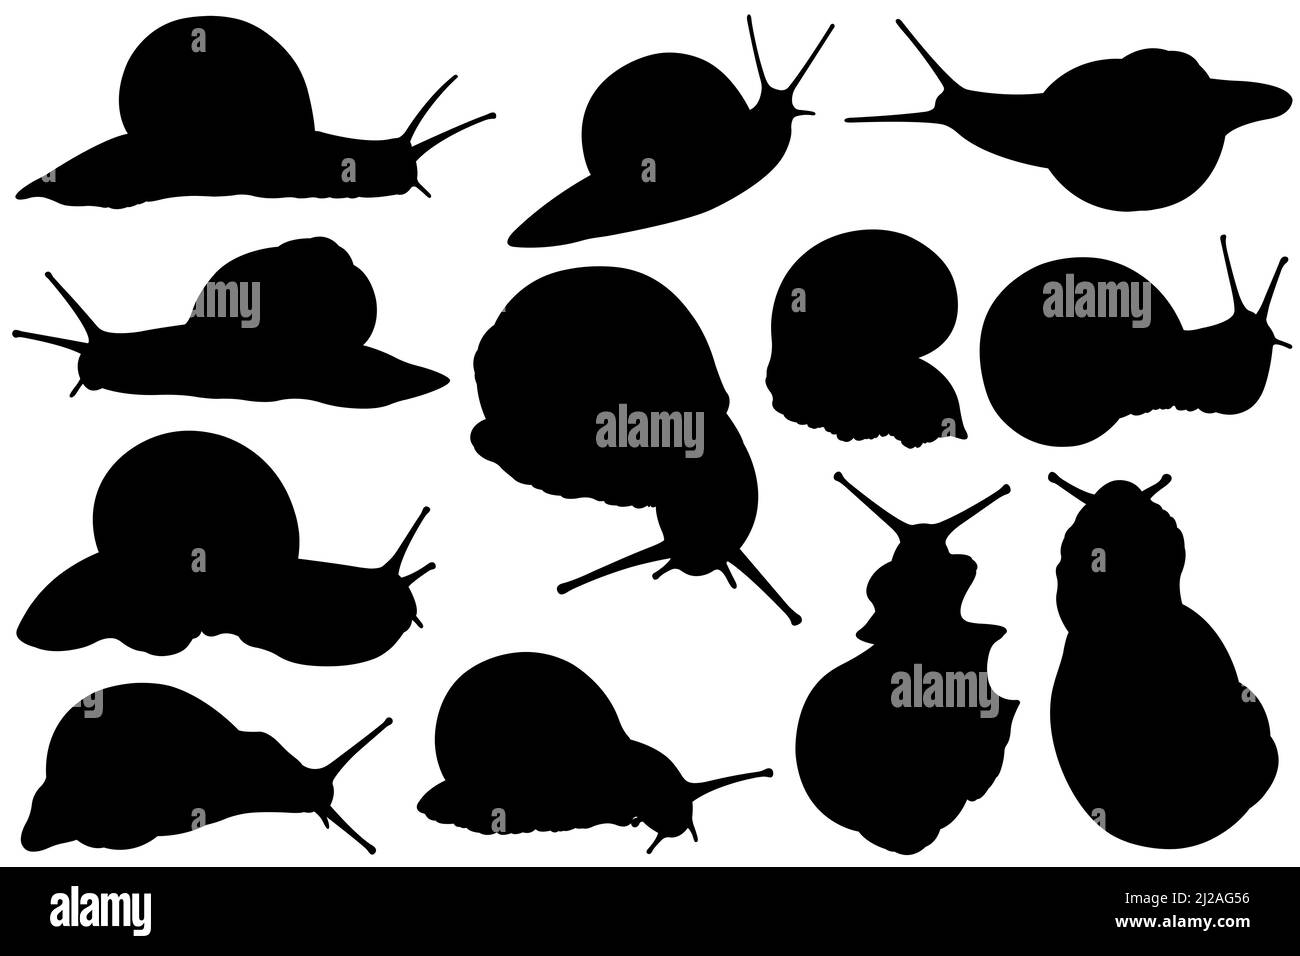 Set of different snail silhouettes isolated on white Stock Photo